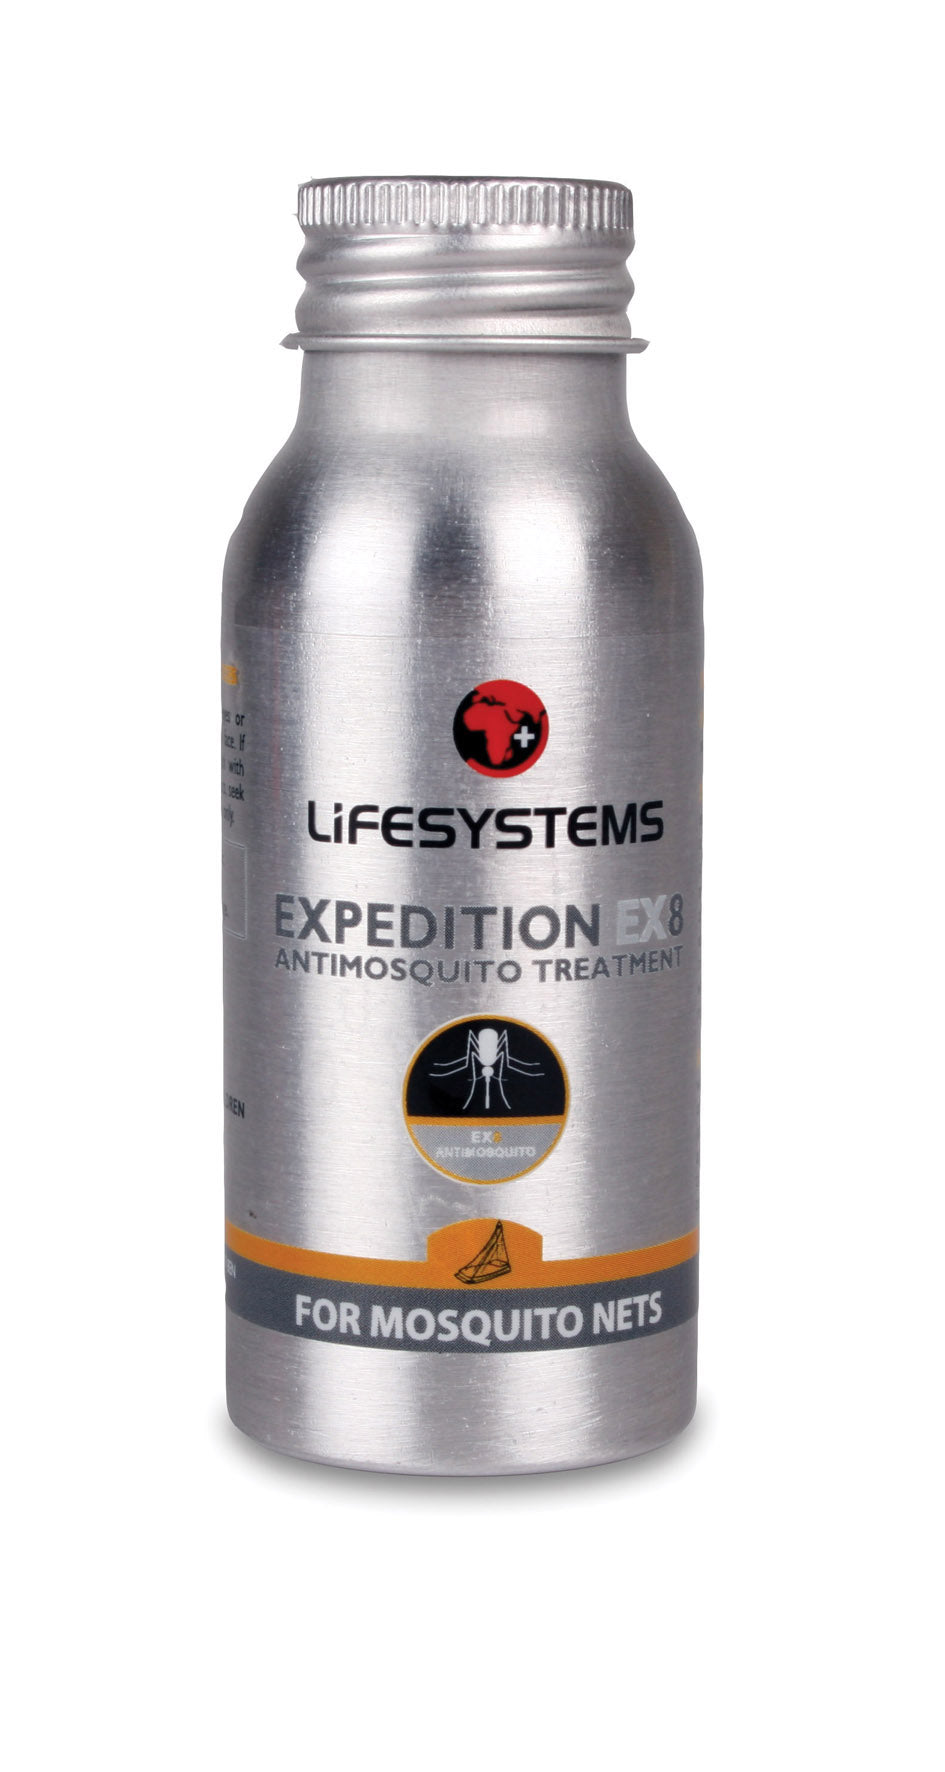 Lifesystems EX8 Anti Mosquito Net Treatment | Insect Repellents | NZ